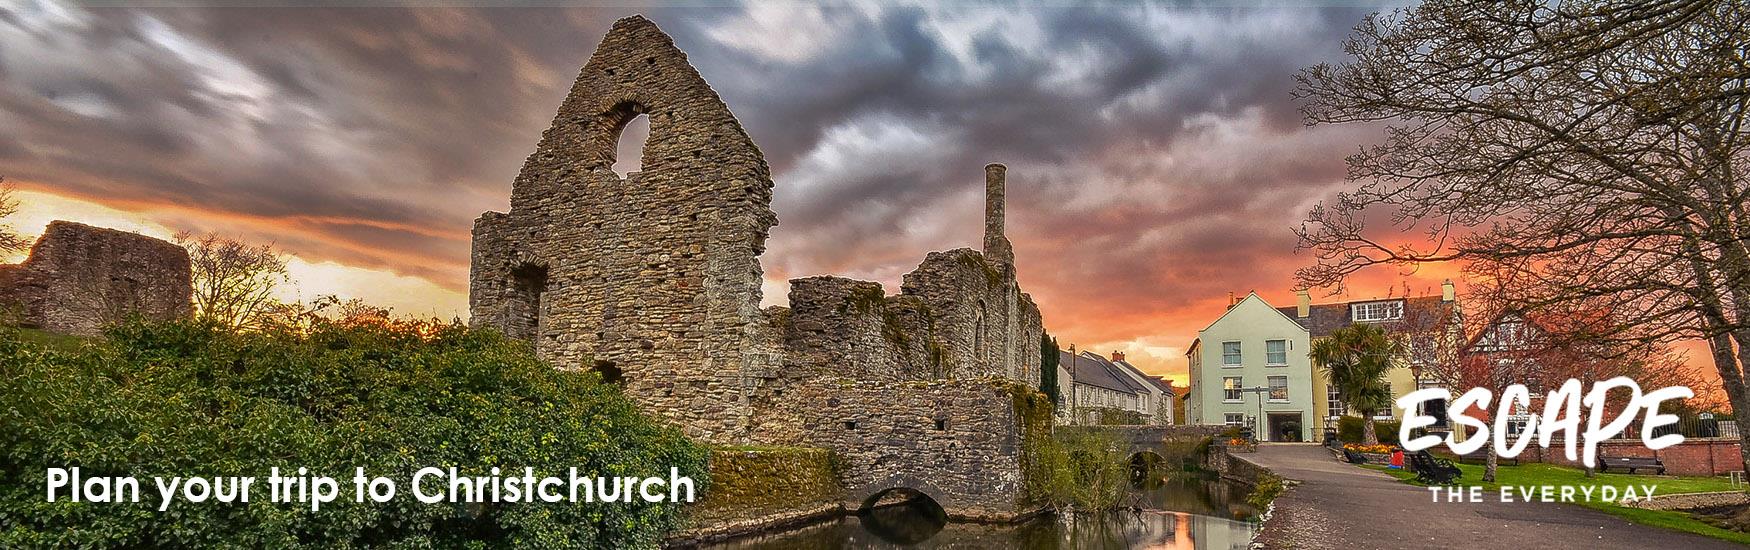 Red fiery sunset behind Christchurchs historic castle ruins with a logo overlay that reads "escape the everyday"